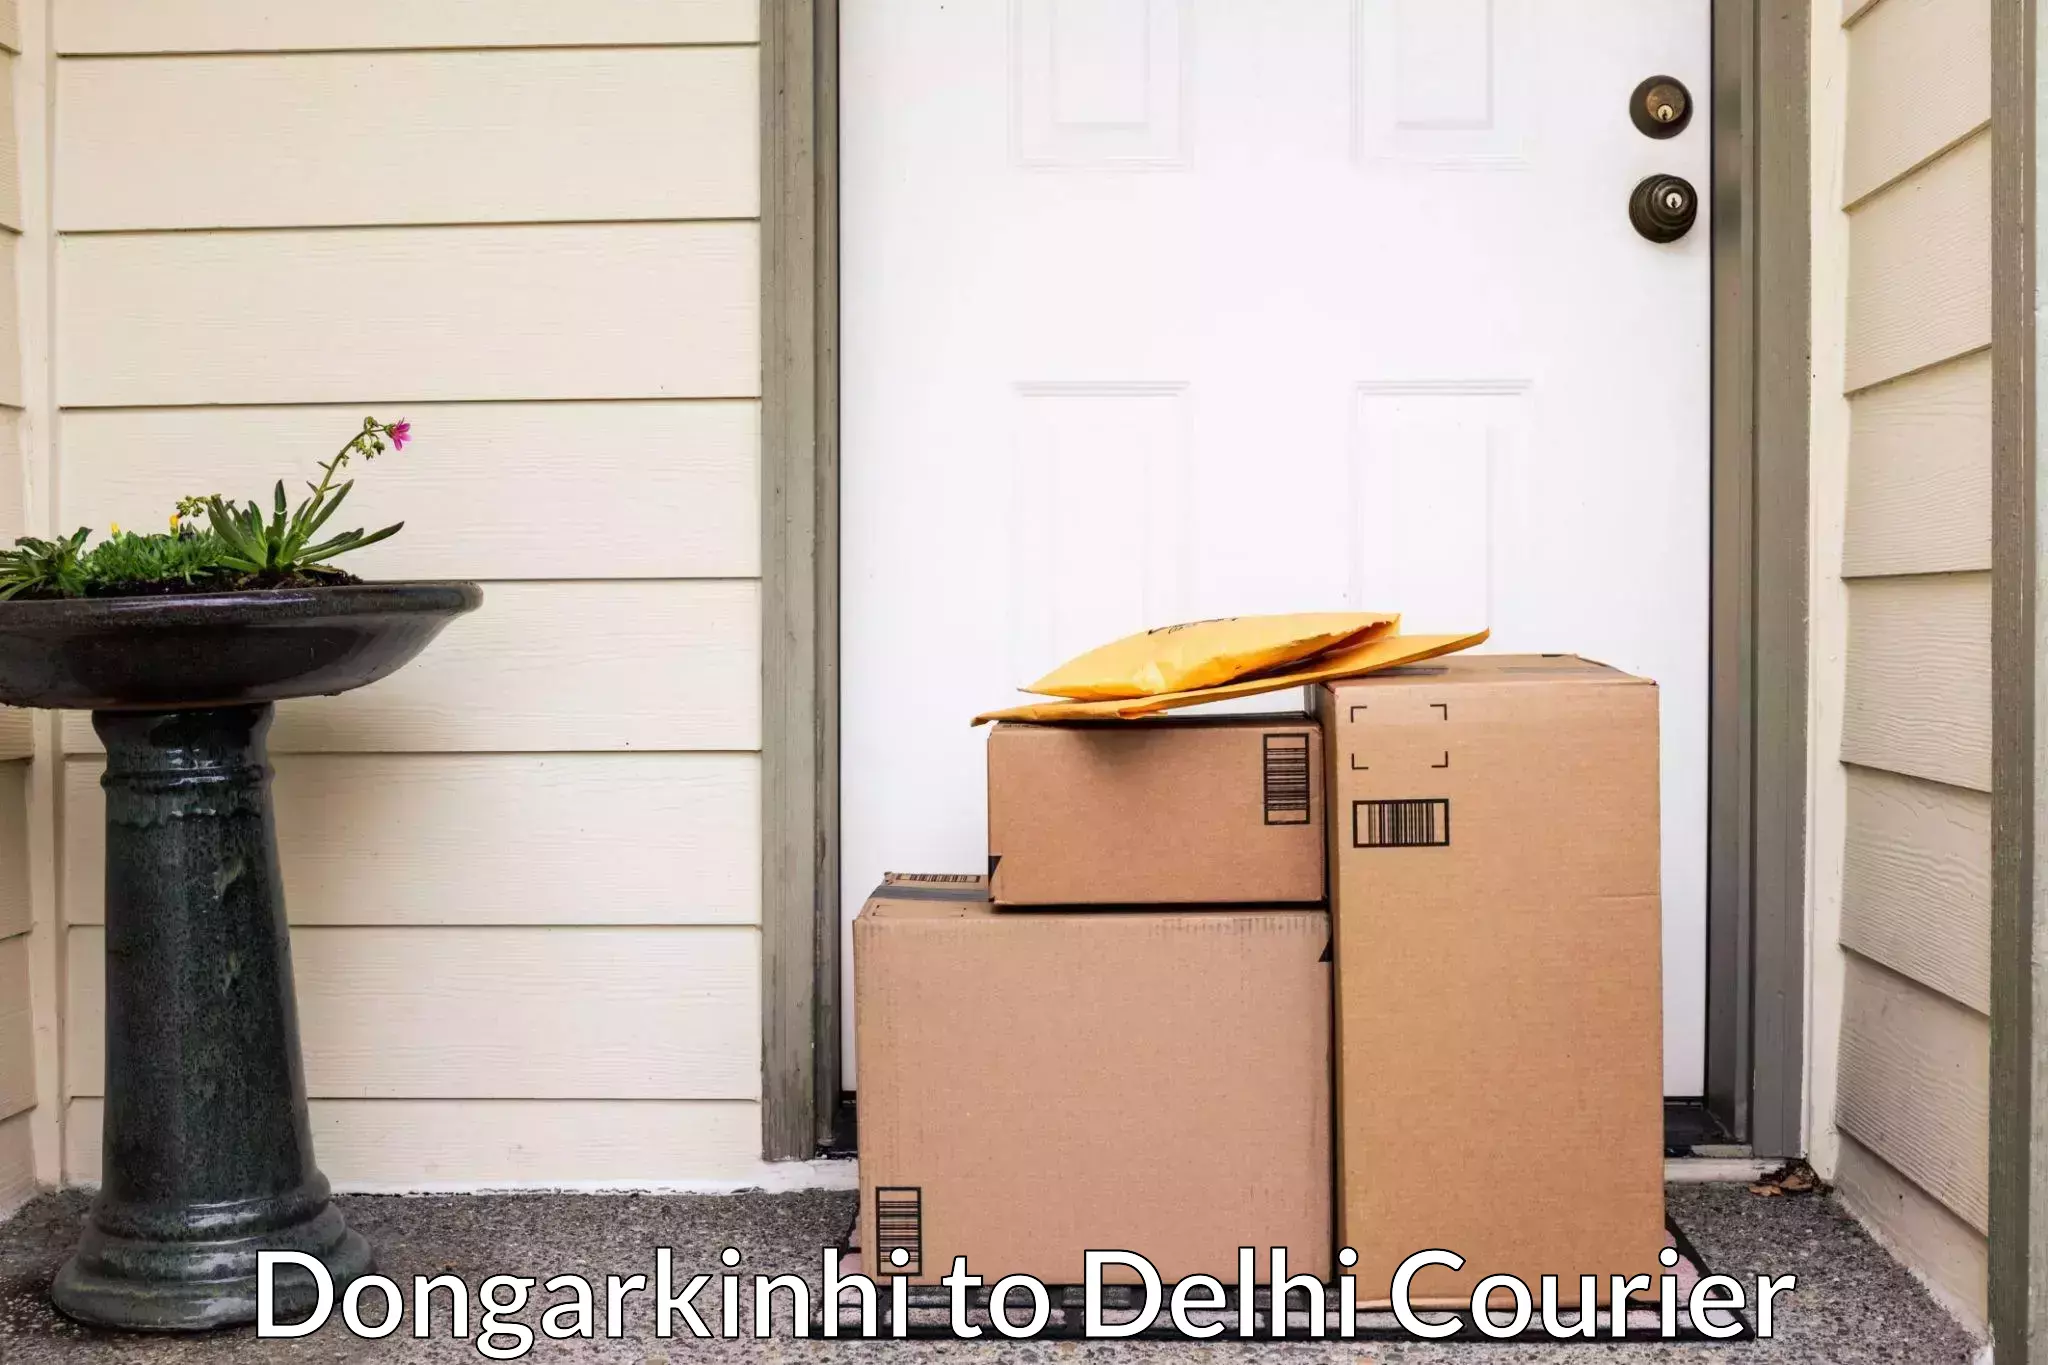 Dependable moving services Dongarkinhi to Delhi Technological University DTU